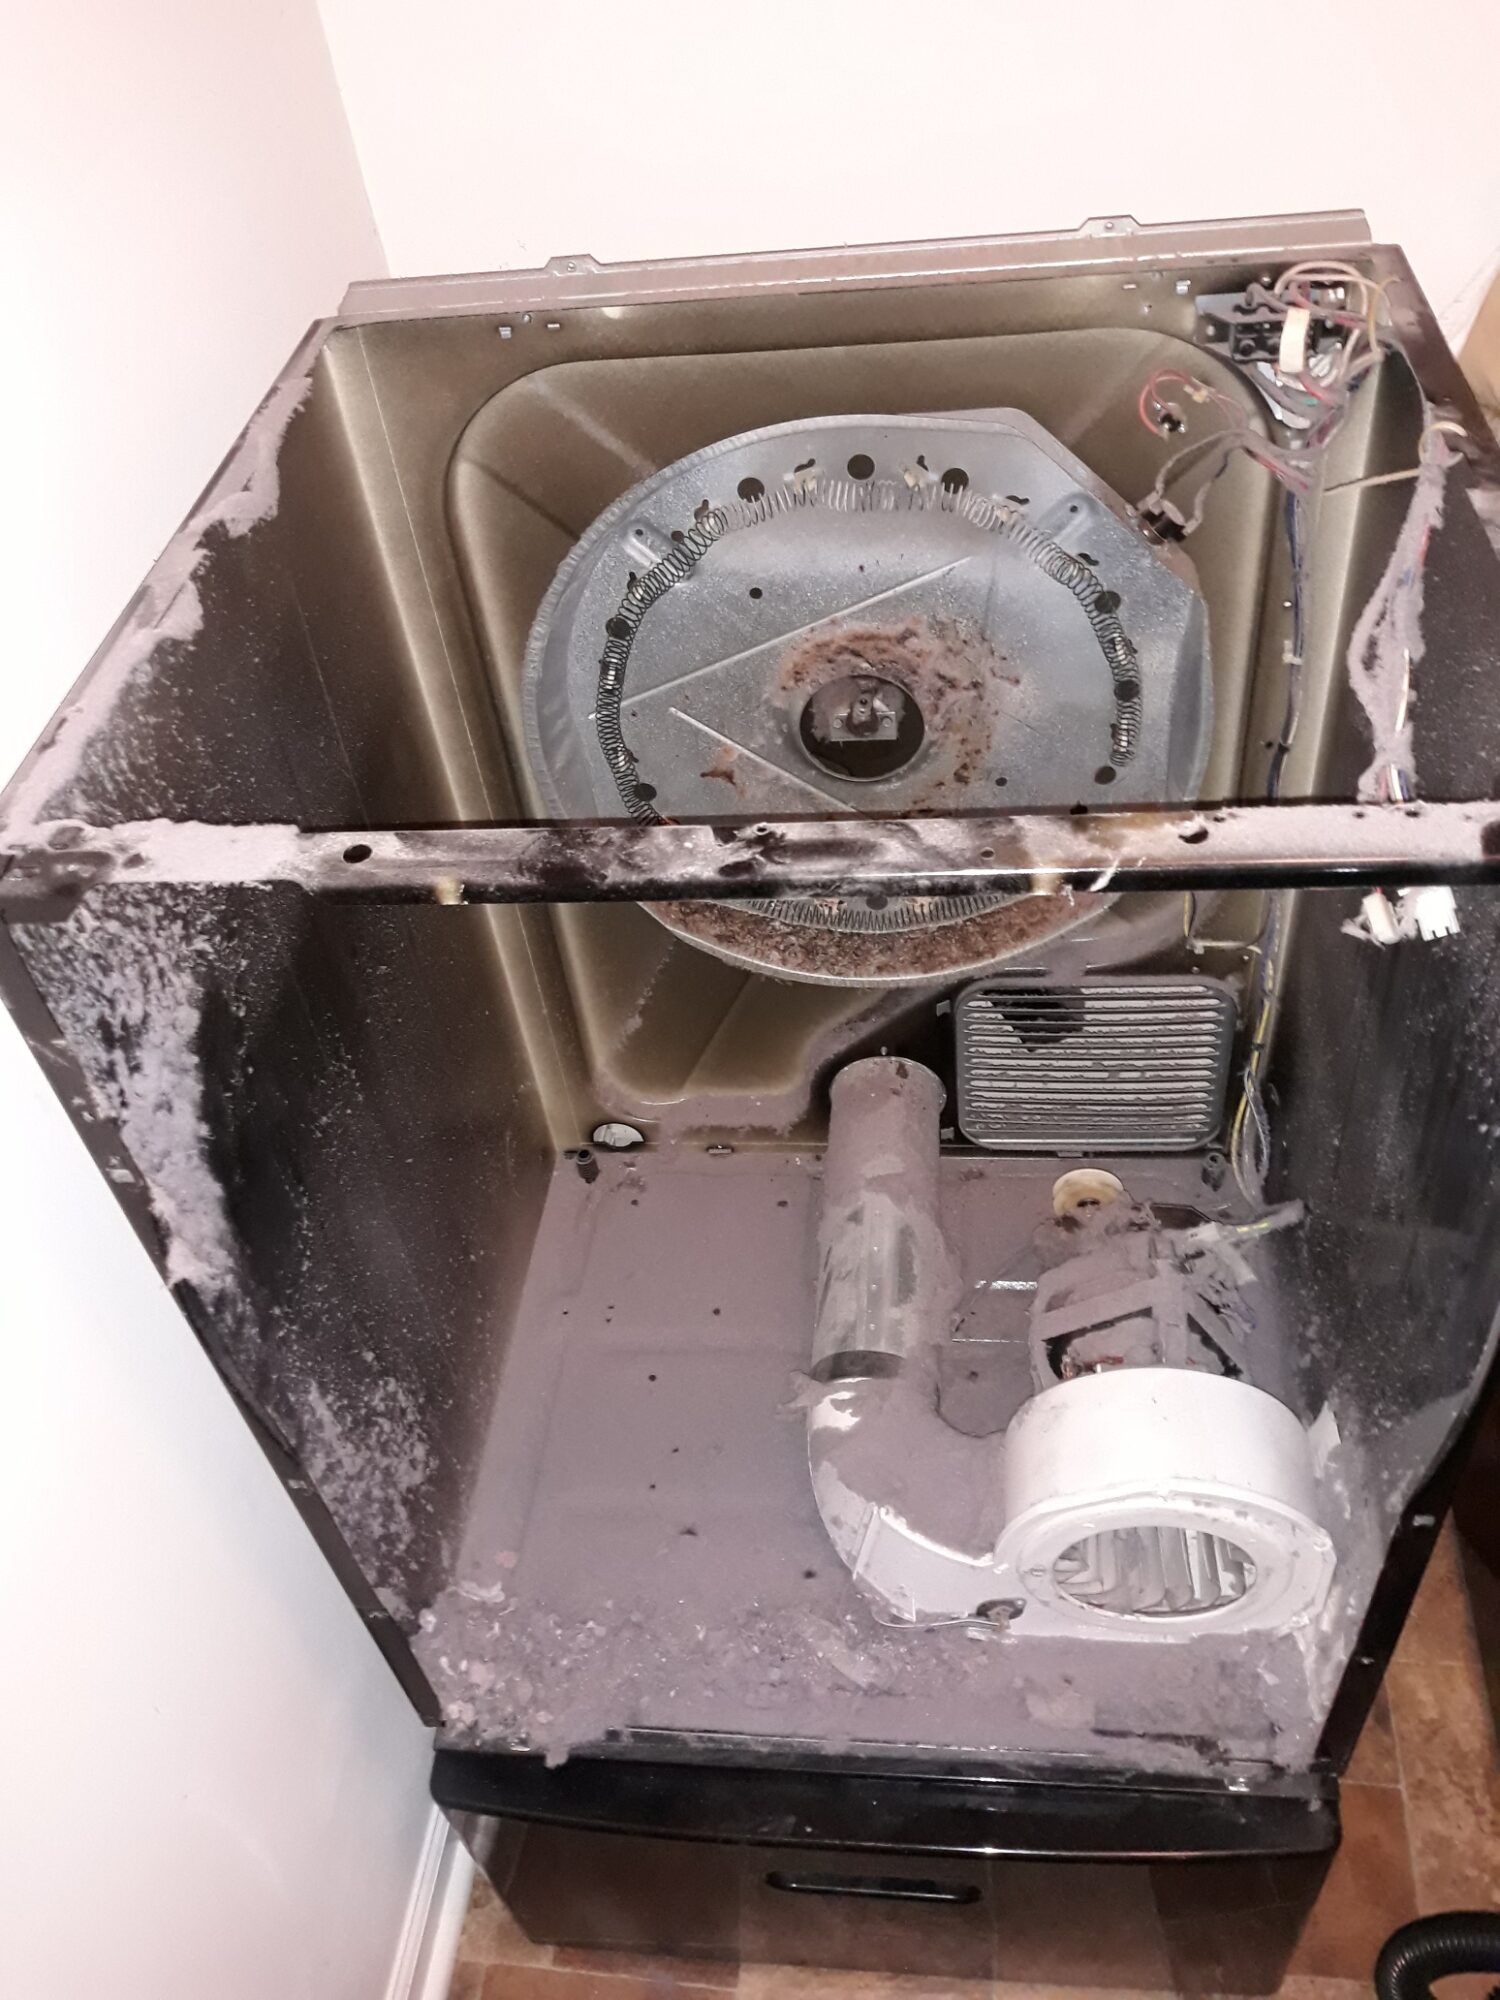 appliance repair dryer repair repair required replacement of the worn drum bearing assembly palmetto ave baldwin fl 32234